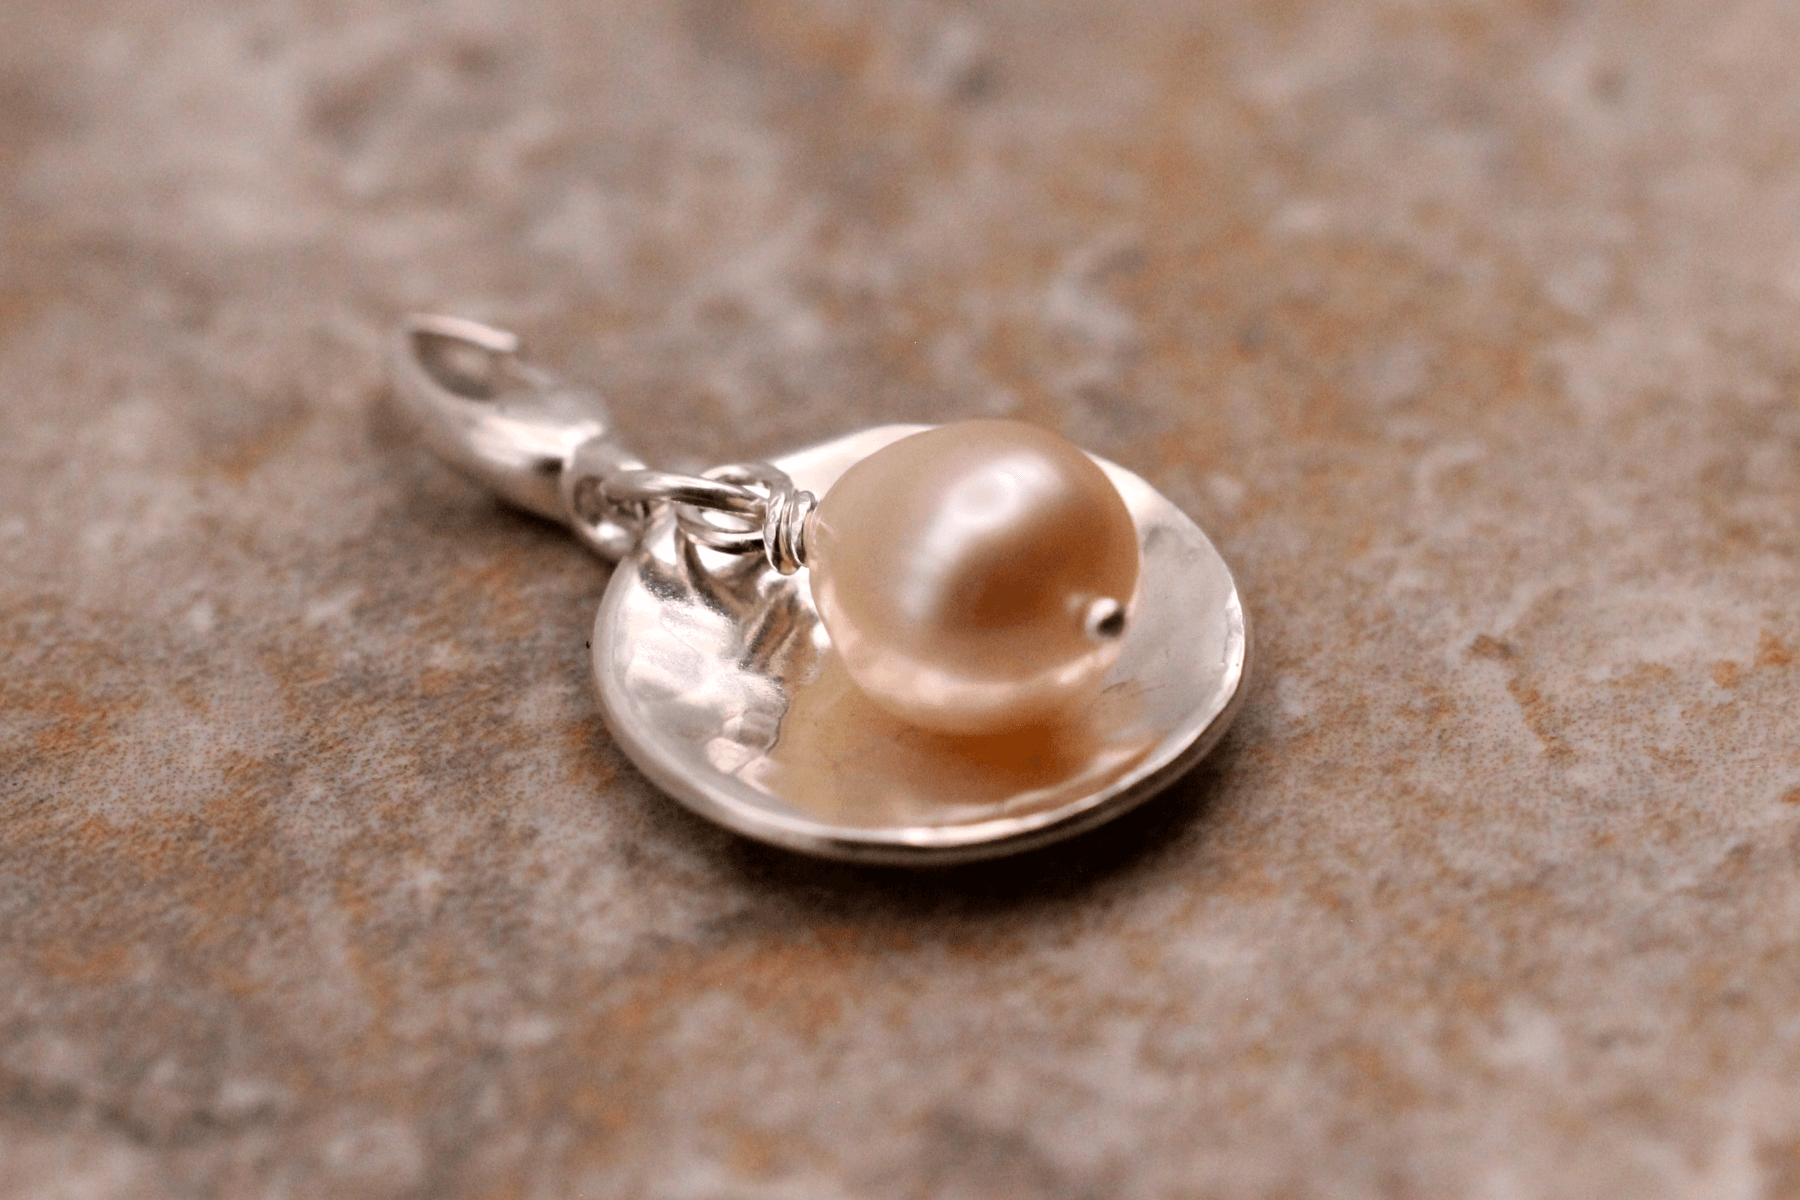 Sterling Silver, Pearl Mirror Charm ~ Handcrafted Jewelry ~ VANDA inspired